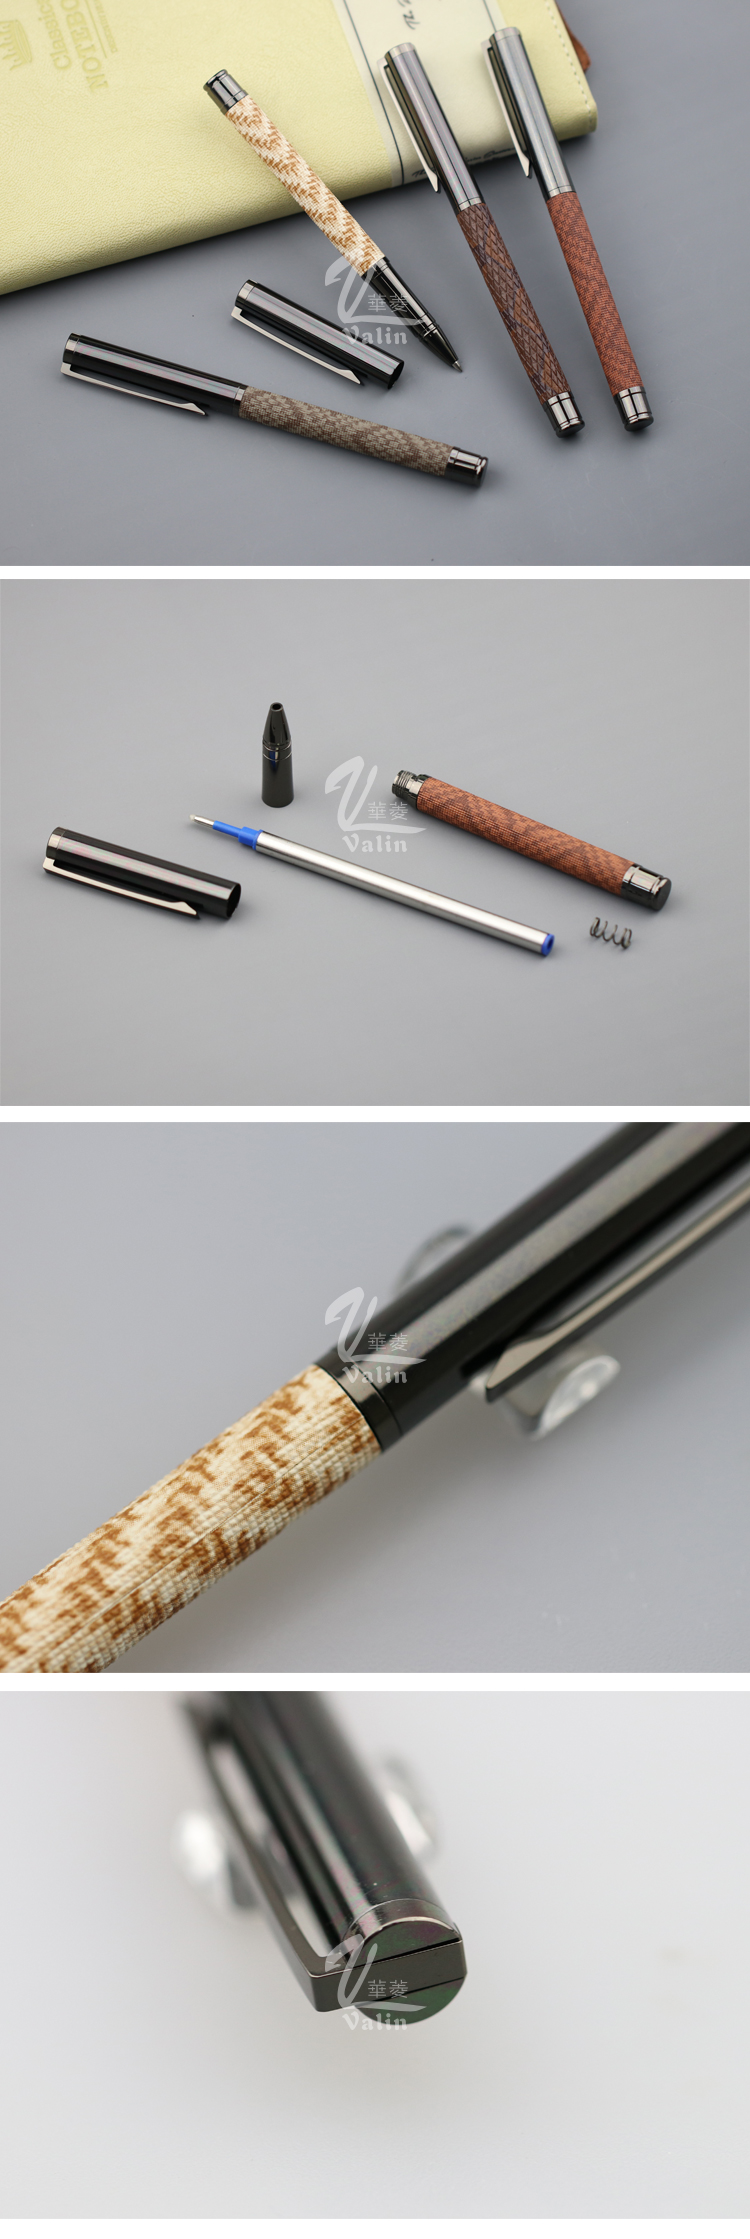 2020 Promotional item metallic ball pens with PU leather